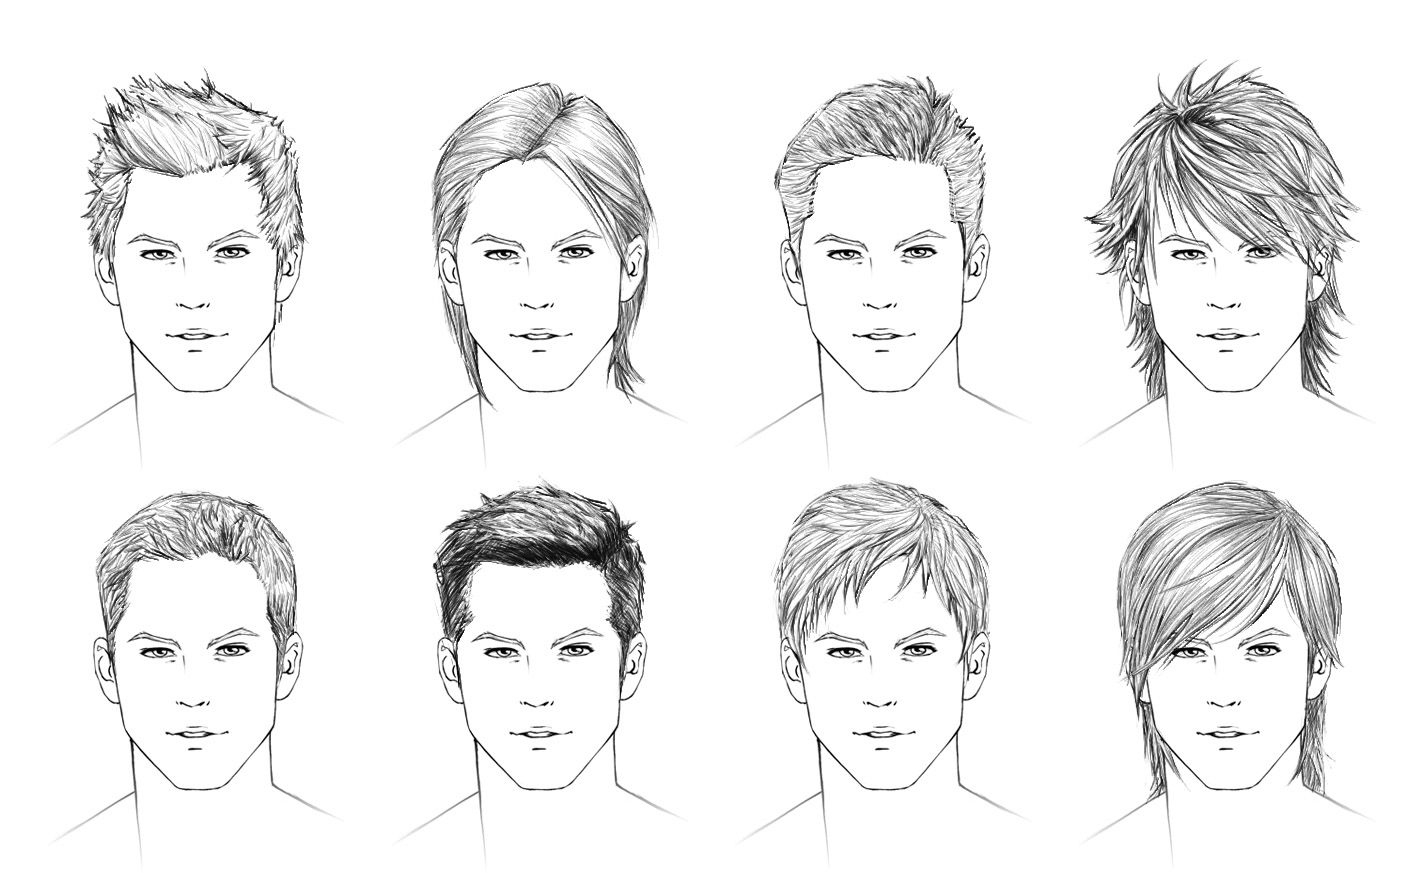 How To Draw Realistic Looking Hair (Guy) | Kid's Activities intended for How To Draw A Guy Hair